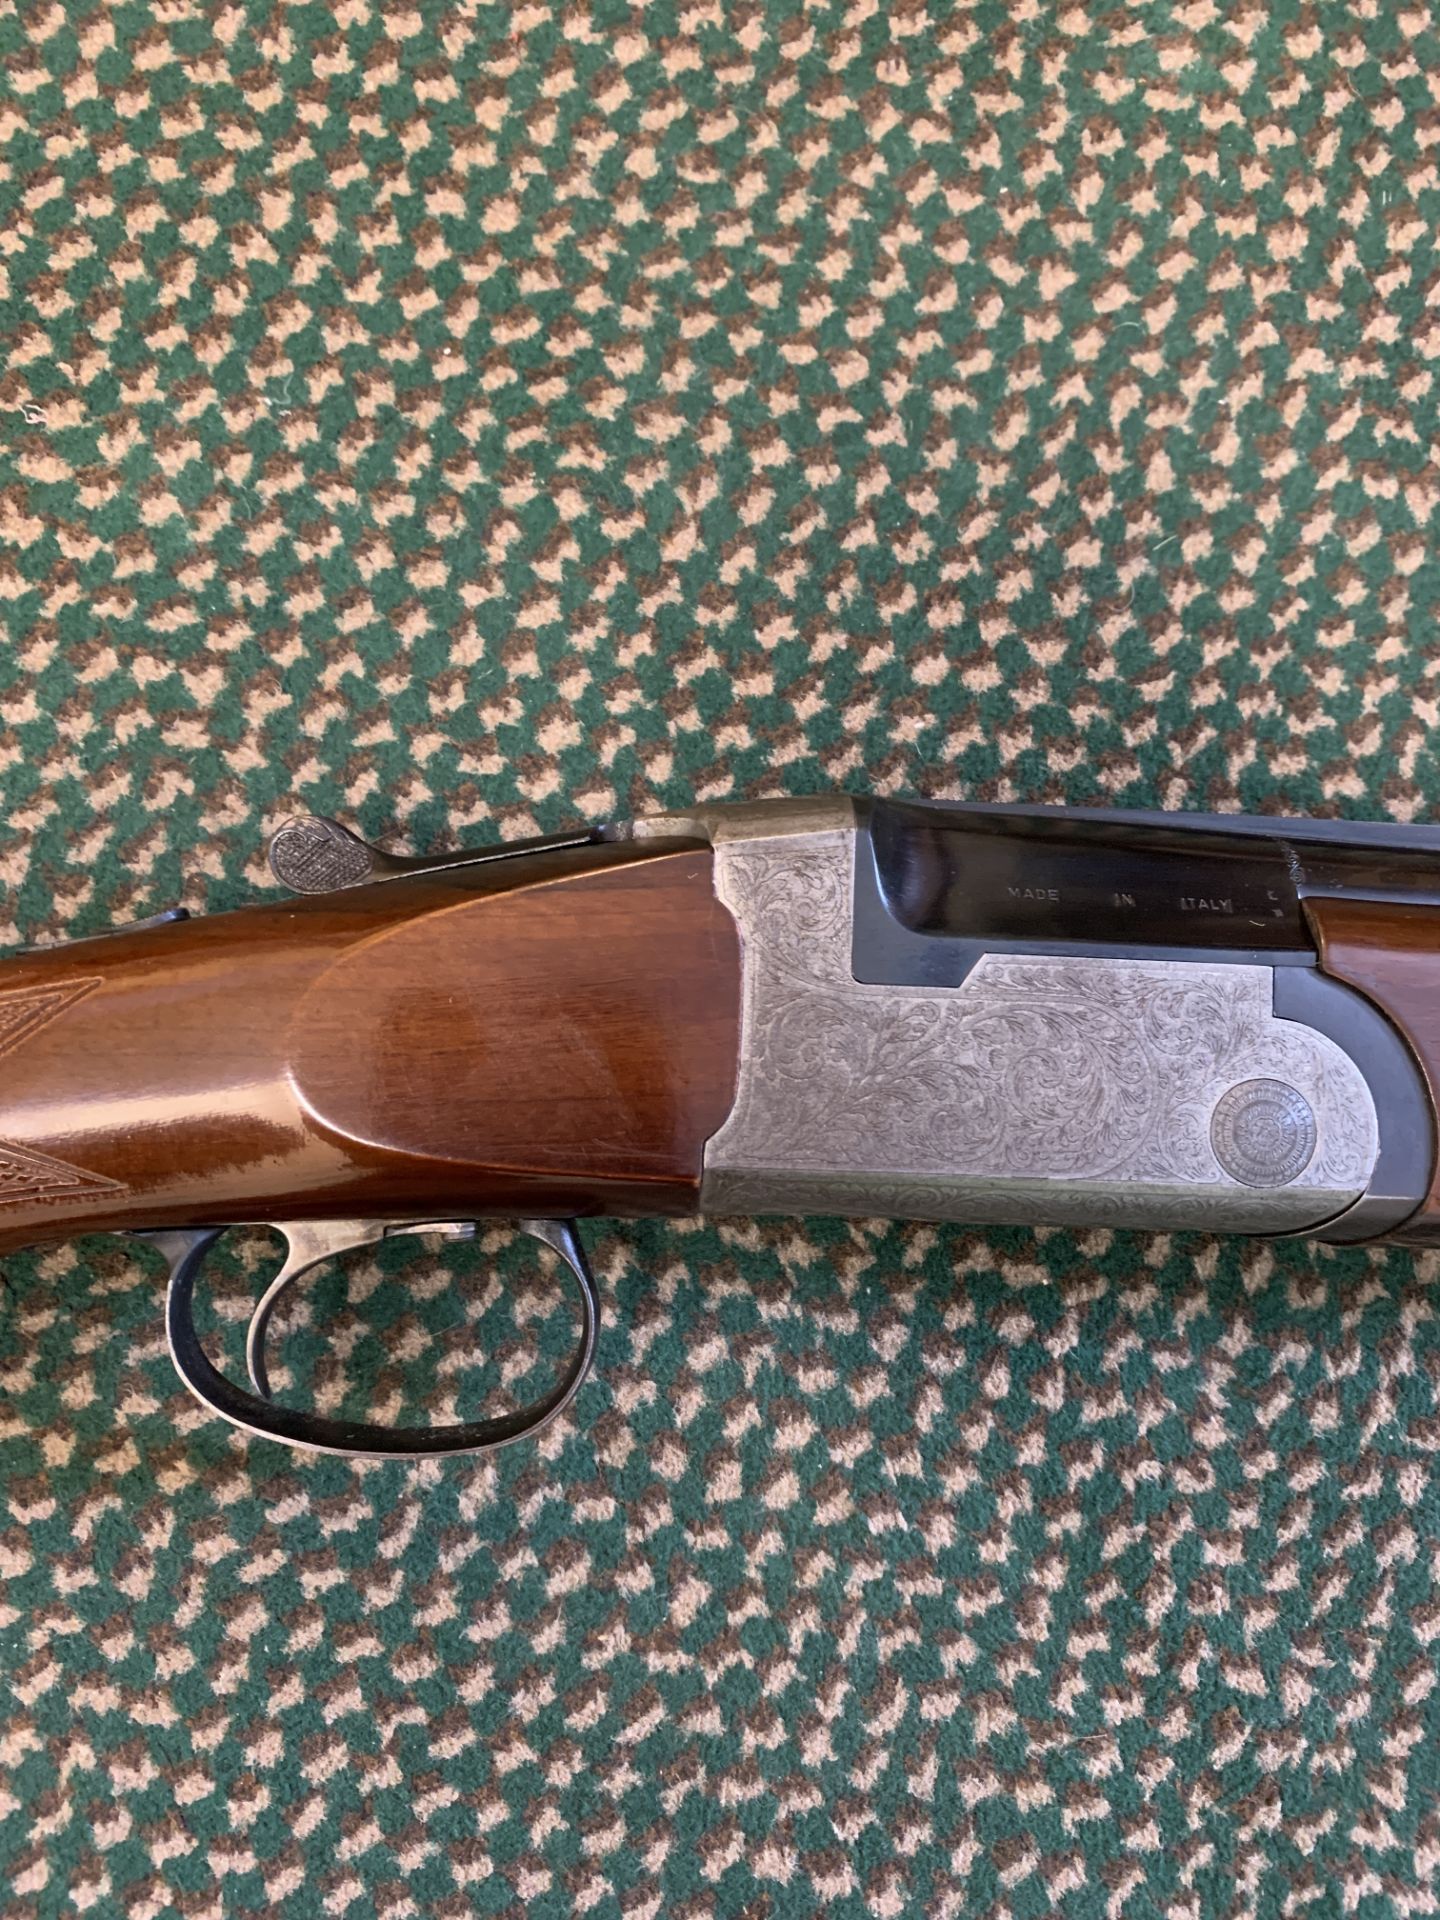 Zoli 12 bore over and under shotgun and cleaning kit. The buyer must have a Shotgun Licence - Image 2 of 5